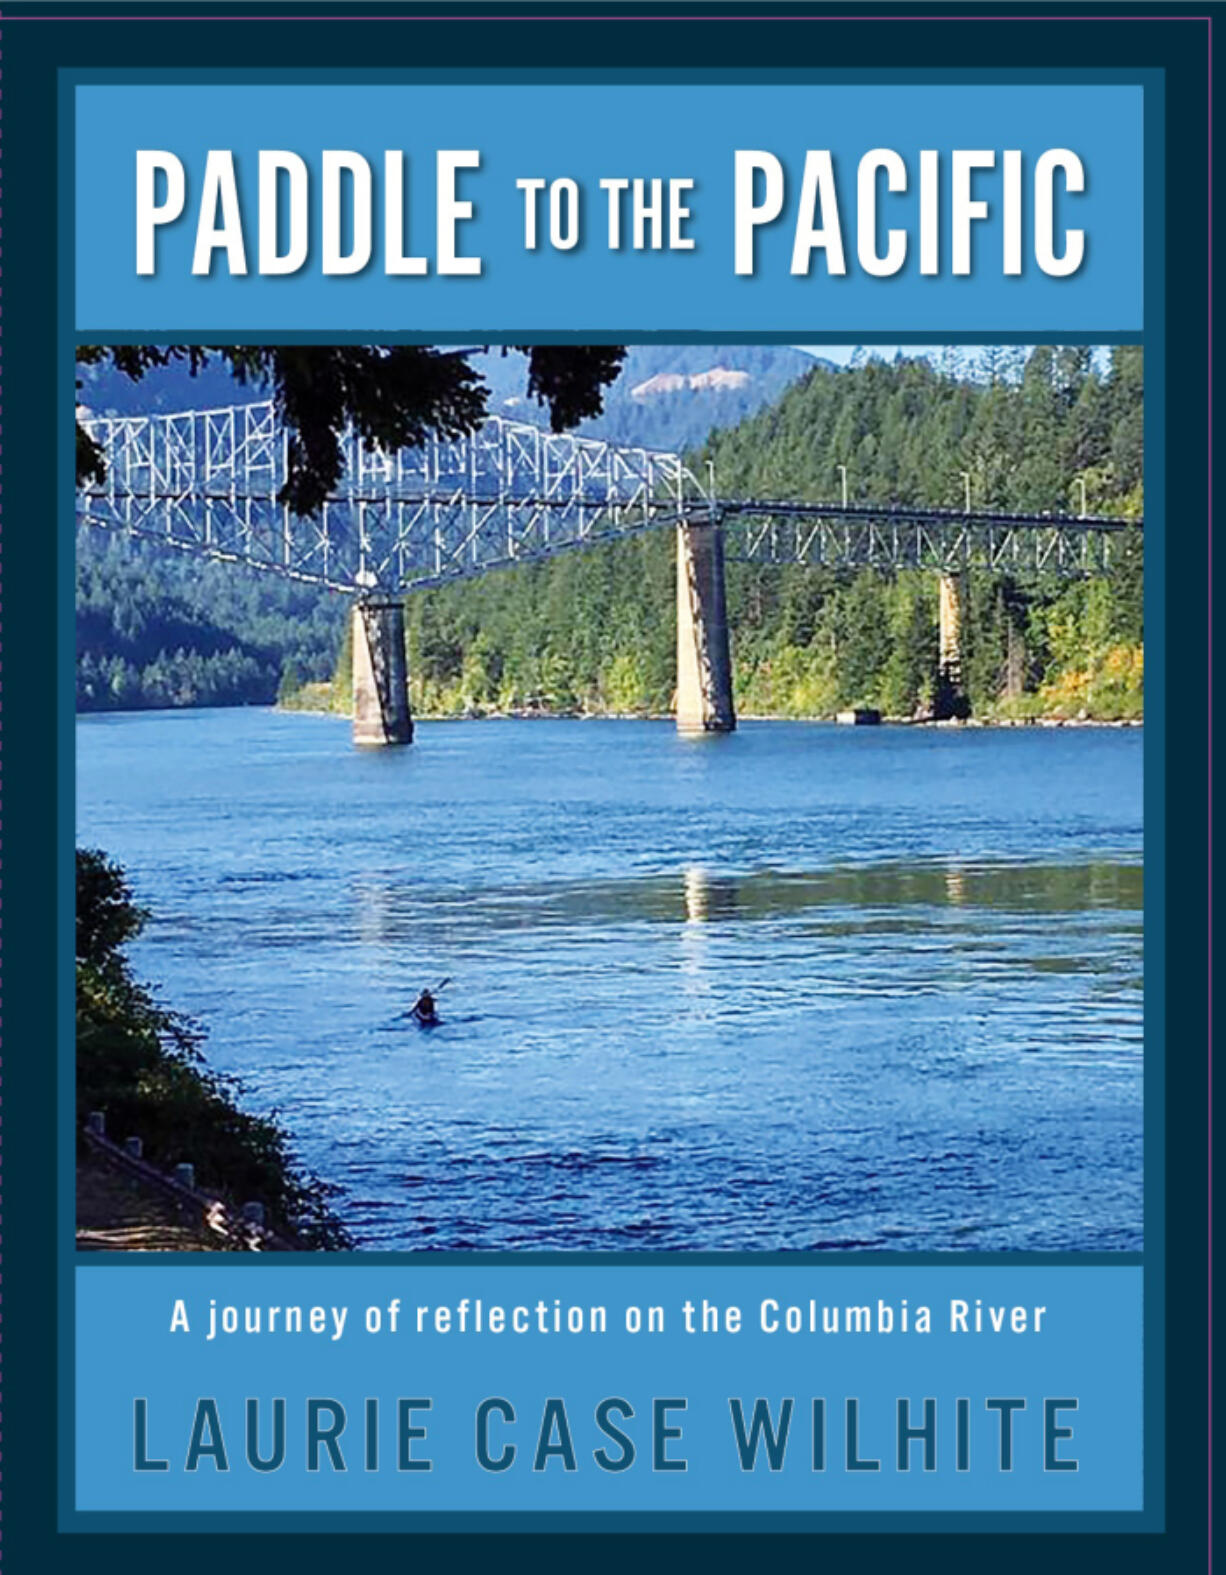 Retired teacher Laurie Case Wilhite paddled from the John Day Dam to the Pacific Ocean, and published a book about it.